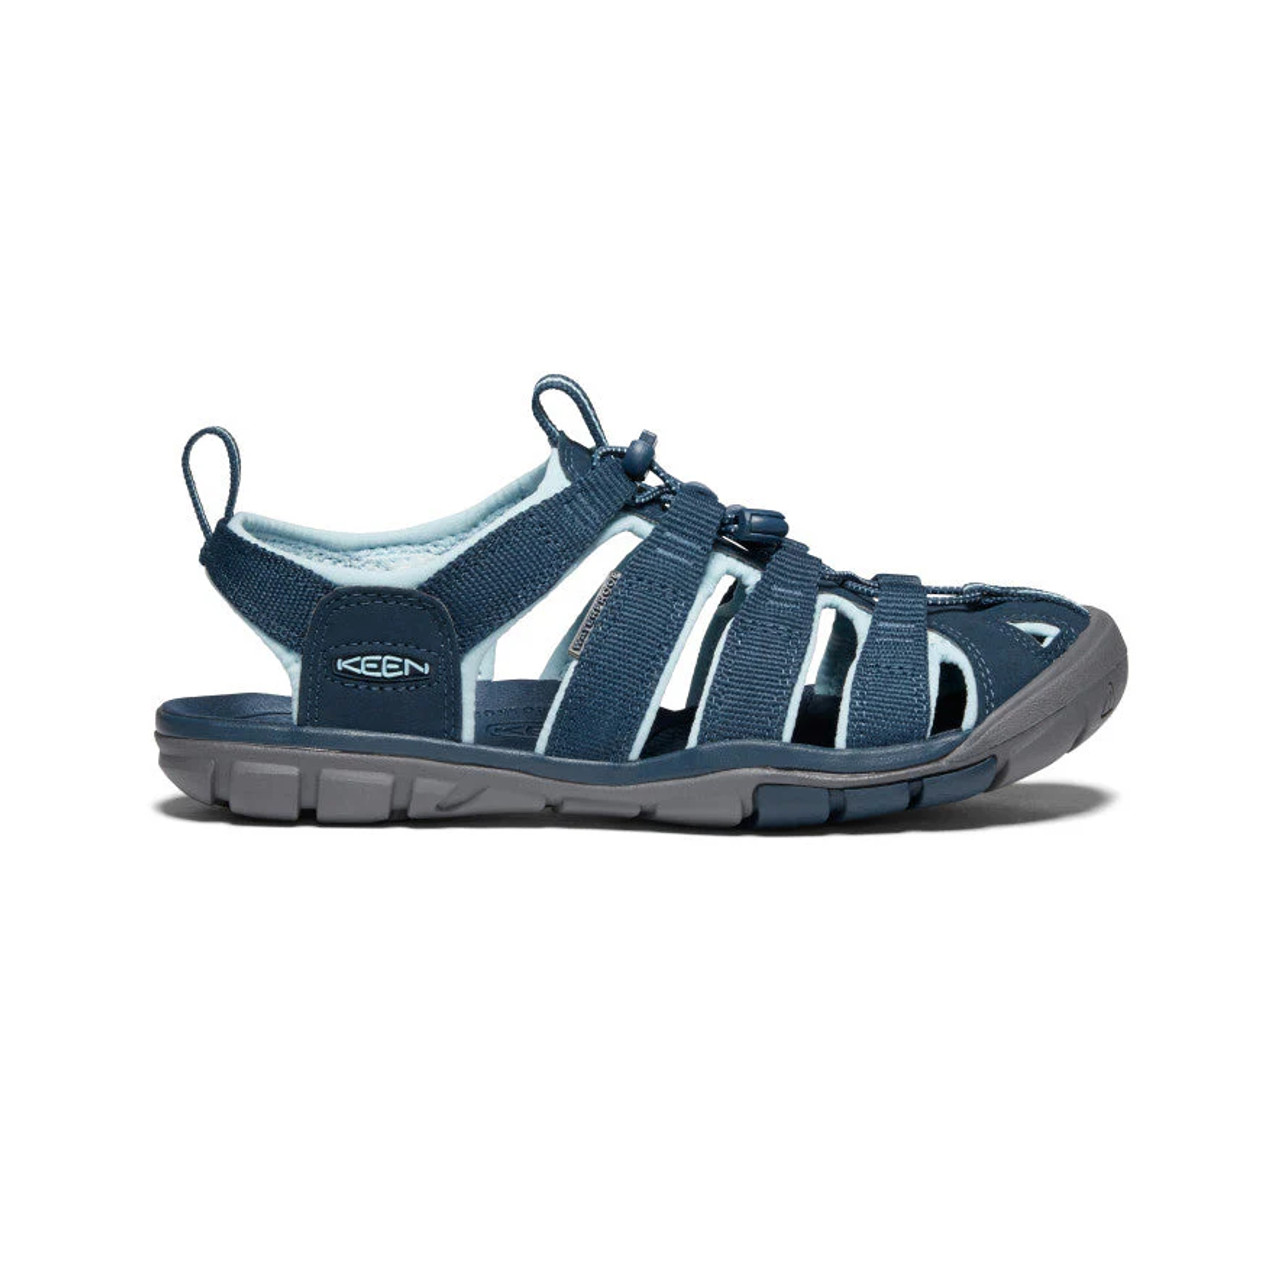 CLEARWATER CNX SANDAL NAVY/BLUE GLOW 1022965 - Brock's